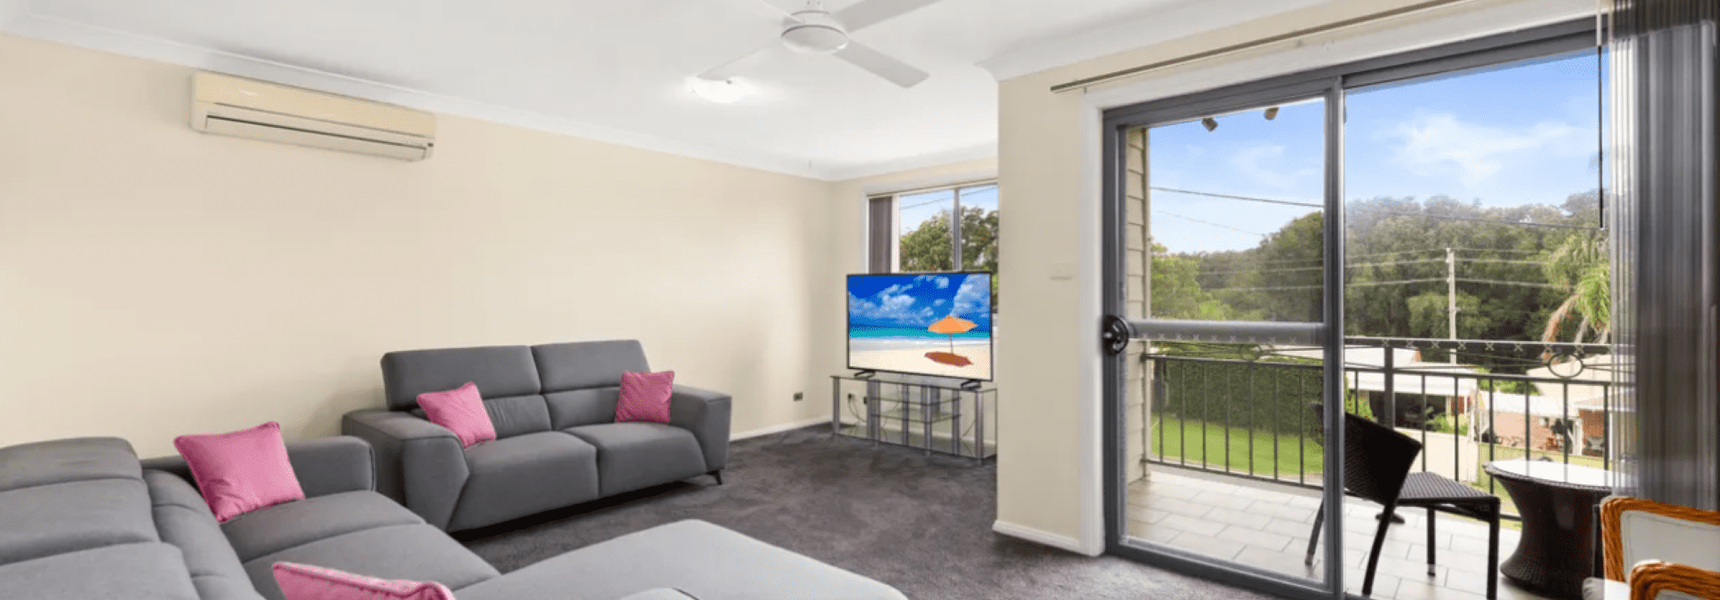 Home of Anna Bay, 112 Old Main Rd – Air Con, WiFi and close to the beach